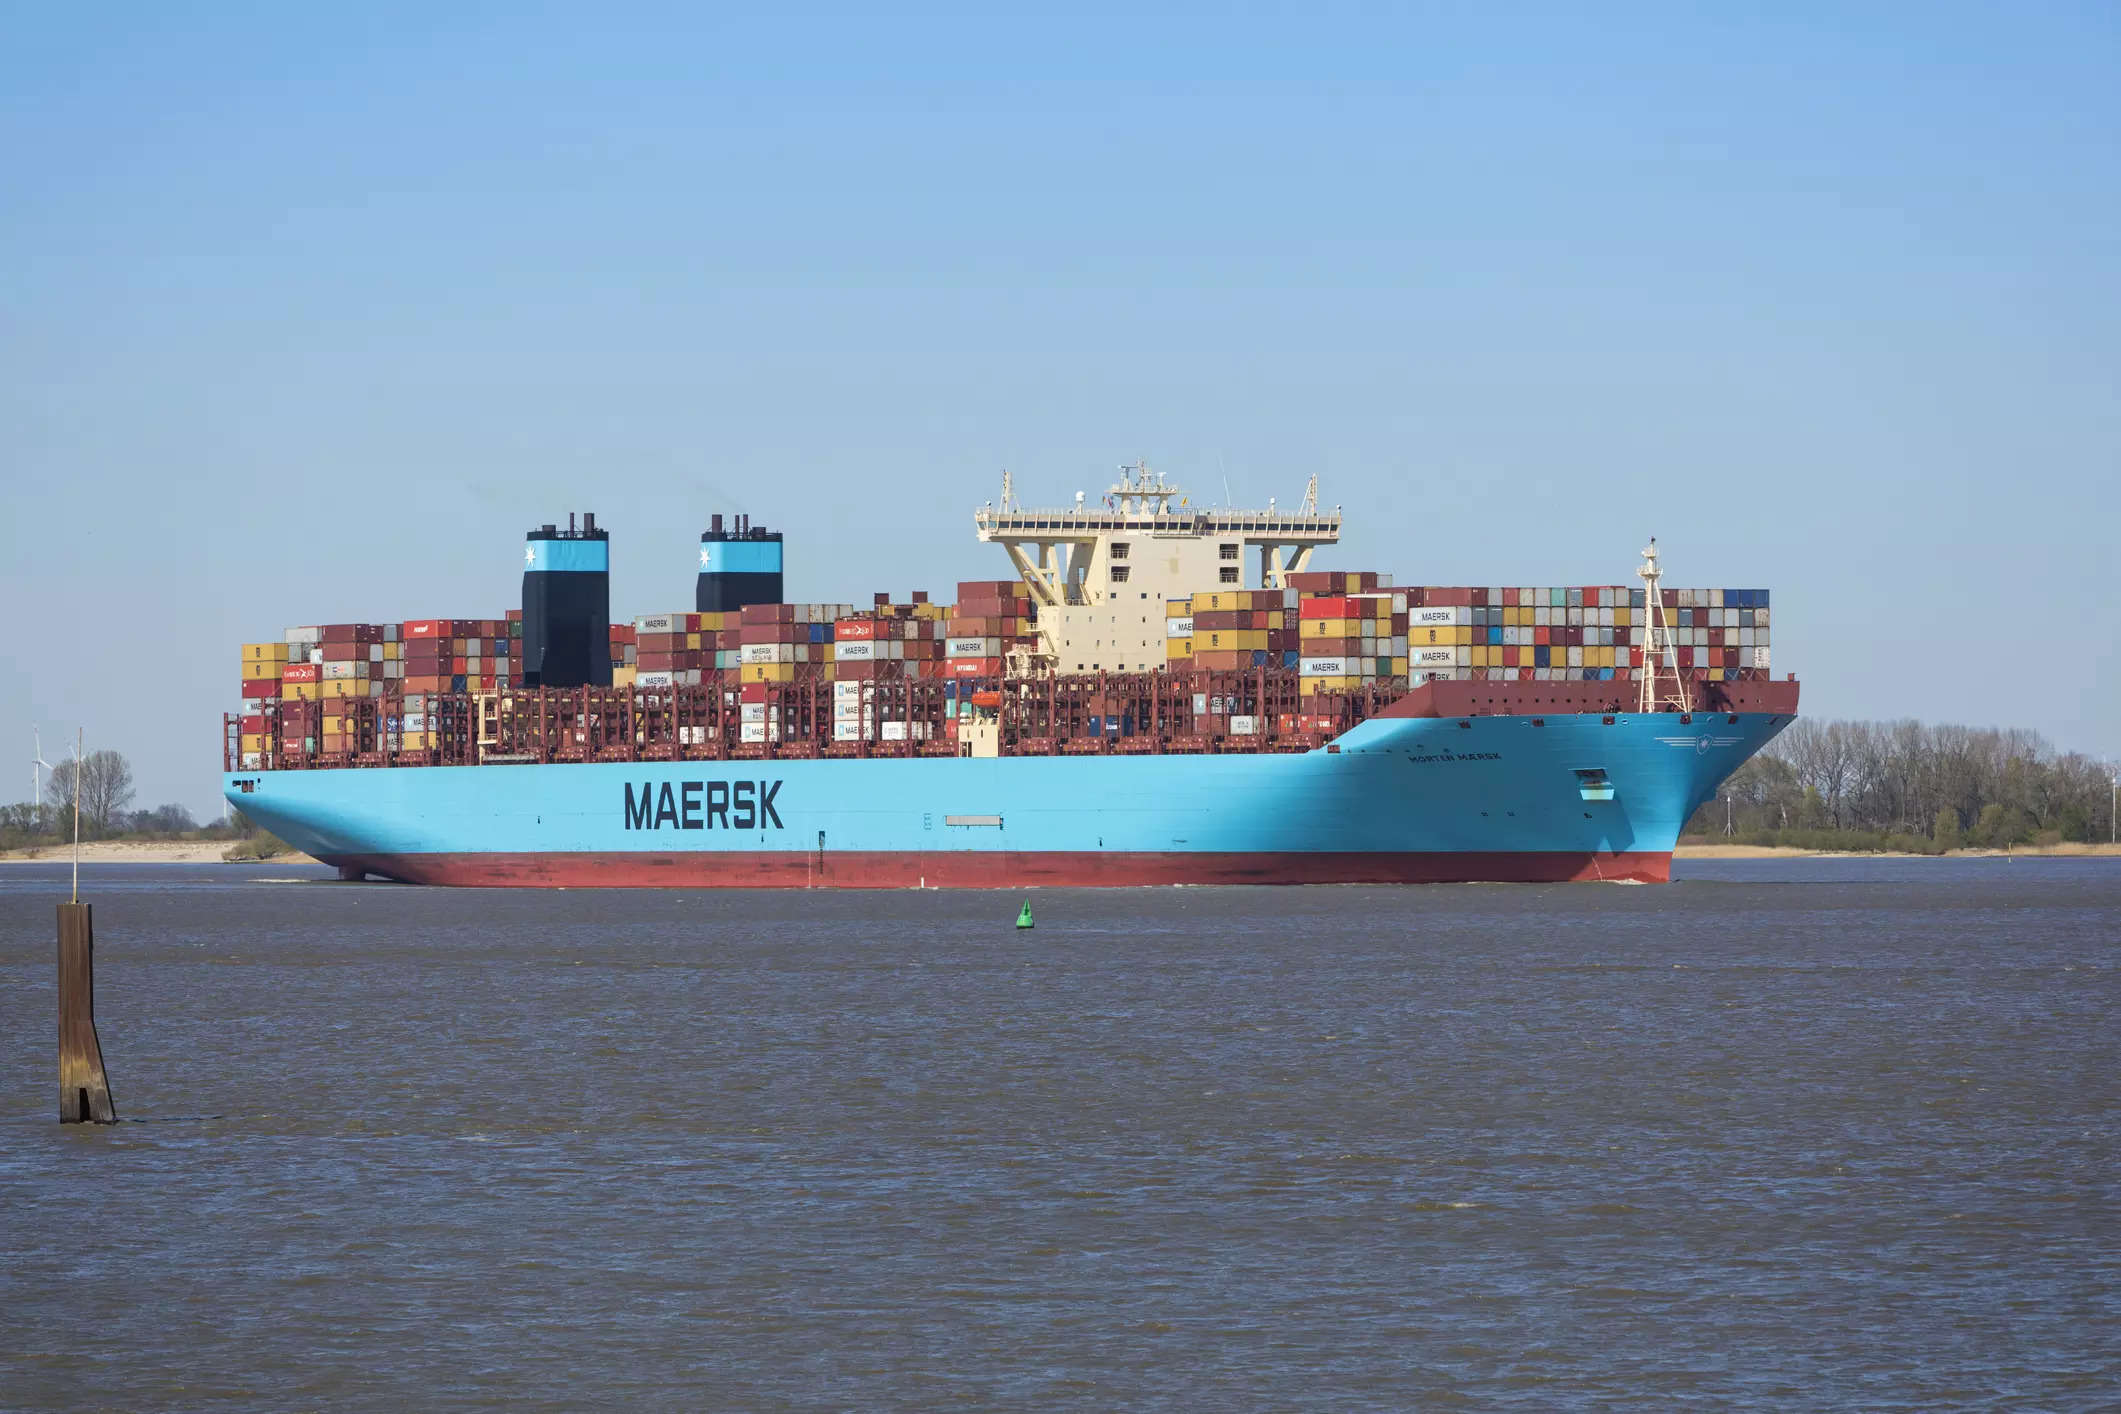 Red Sea disruption cuts Q2 capacity by 15%-20%, Maersk says 